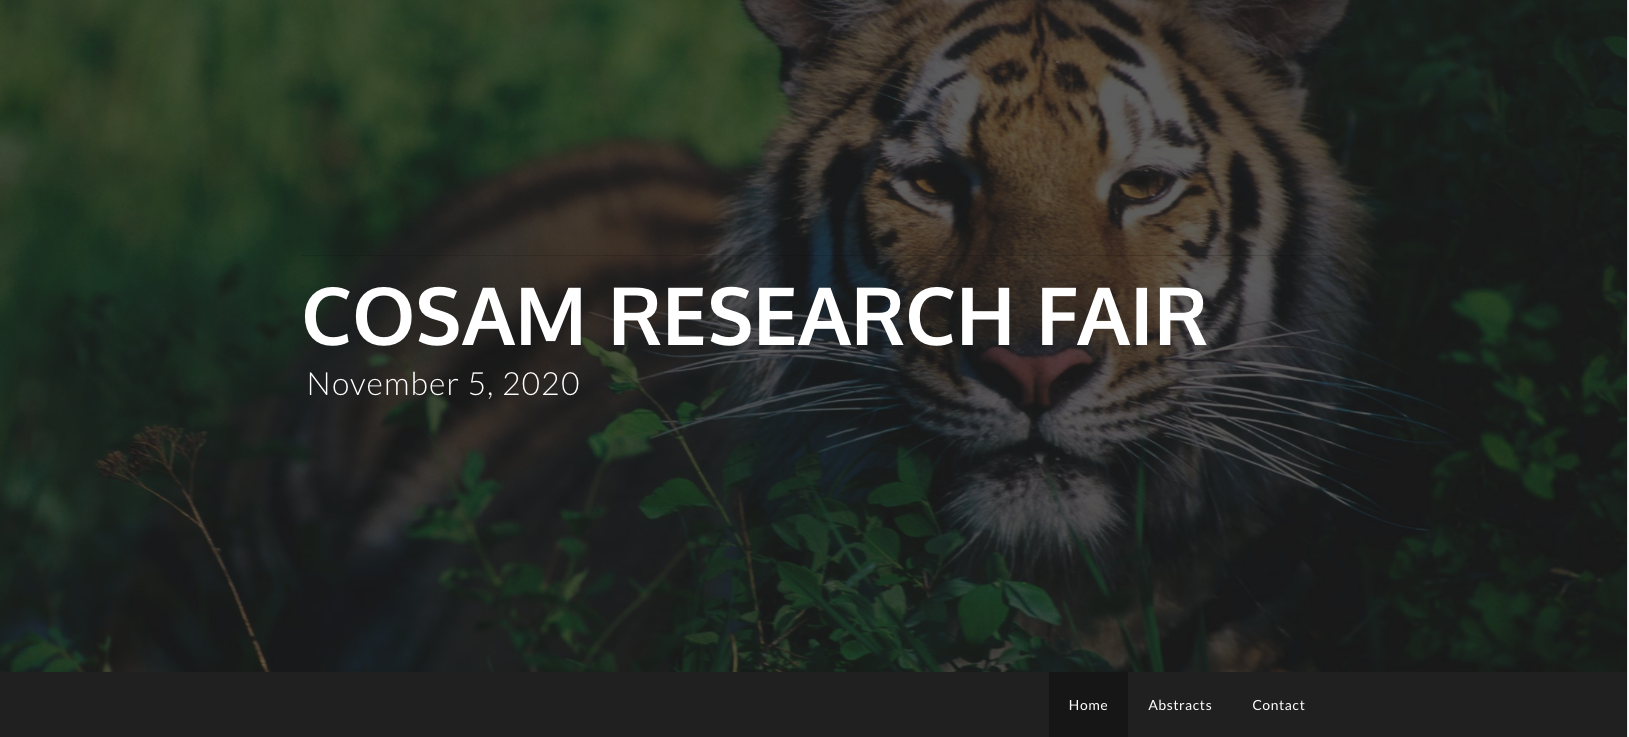 Congratulations to the COSAM Research Fair winners